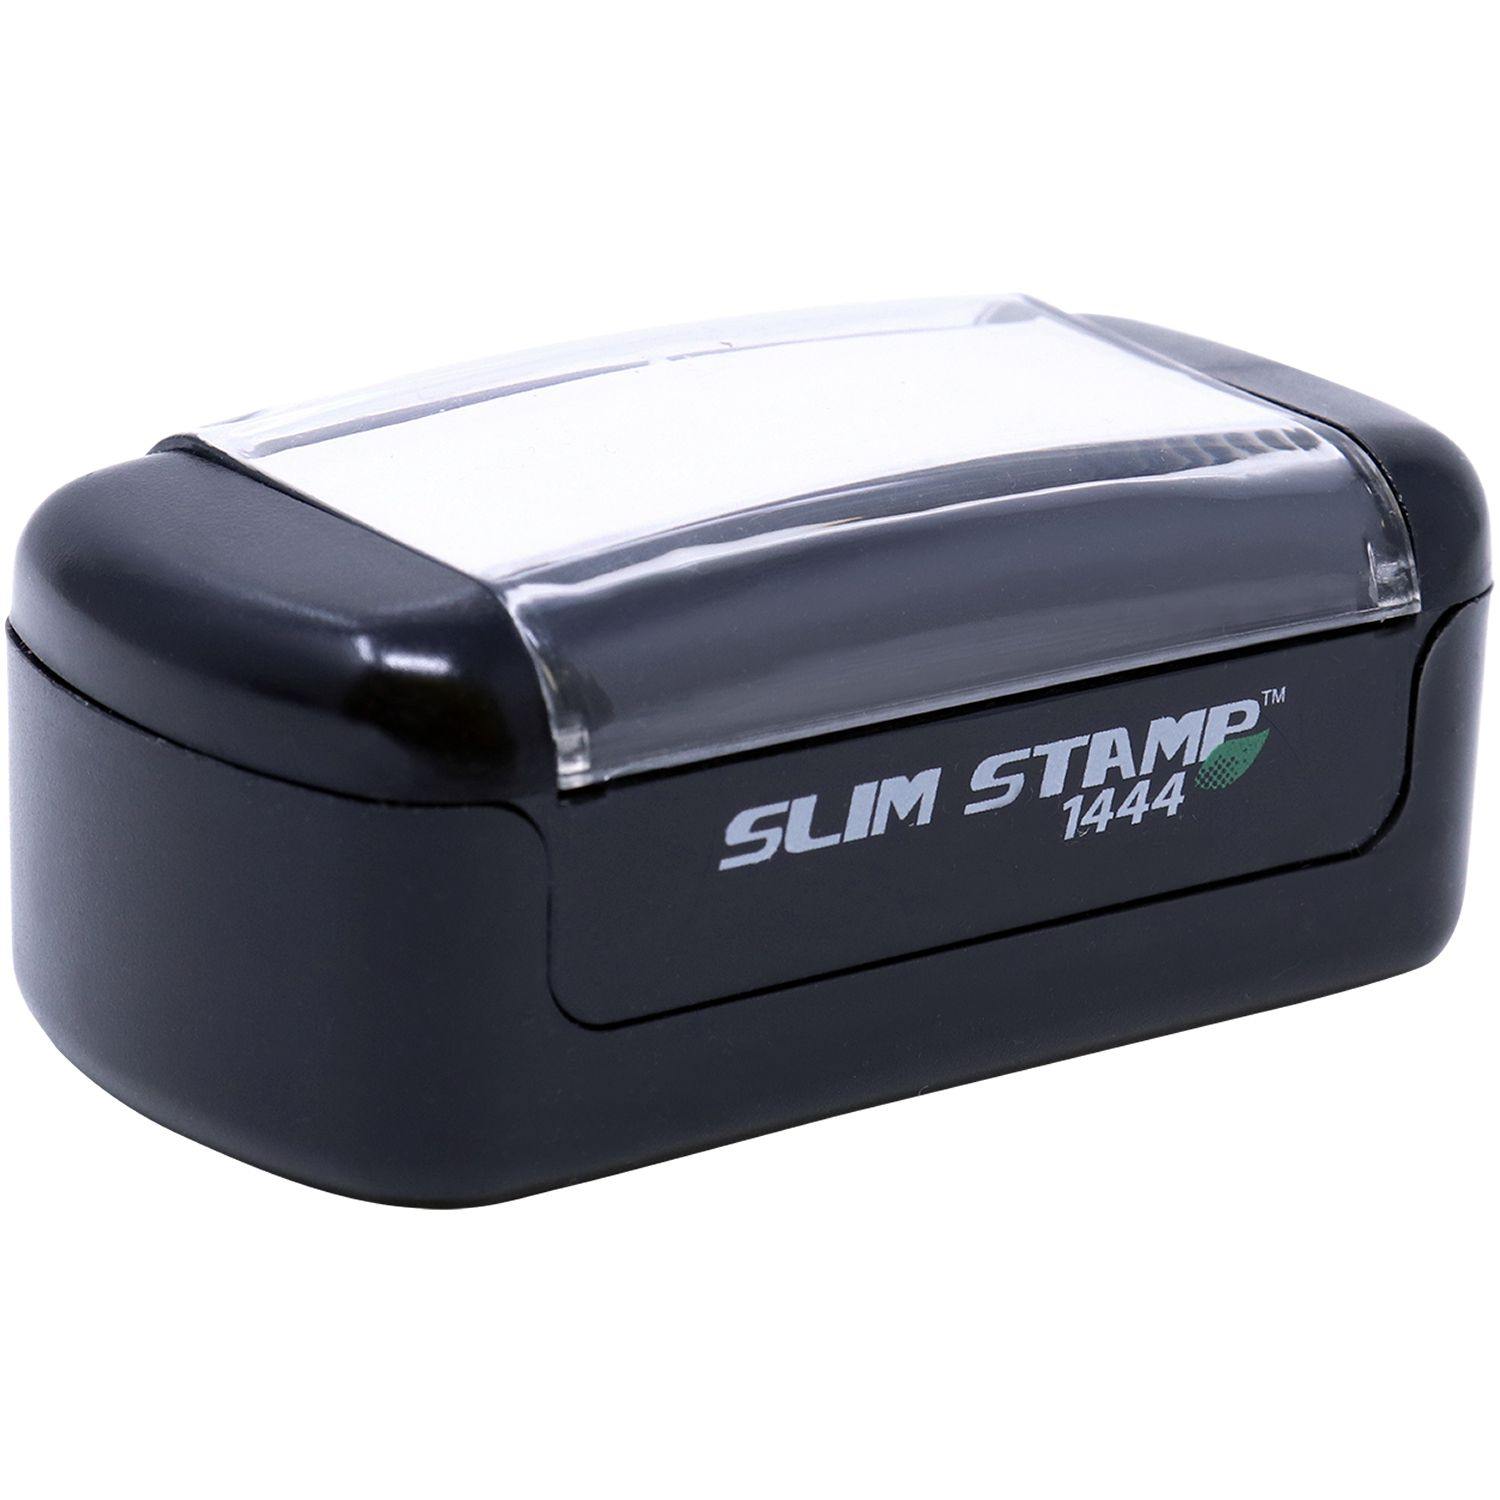 Alt View of Slim Pre-Inked Narrow Font Duplicate Stamp Mount Angle